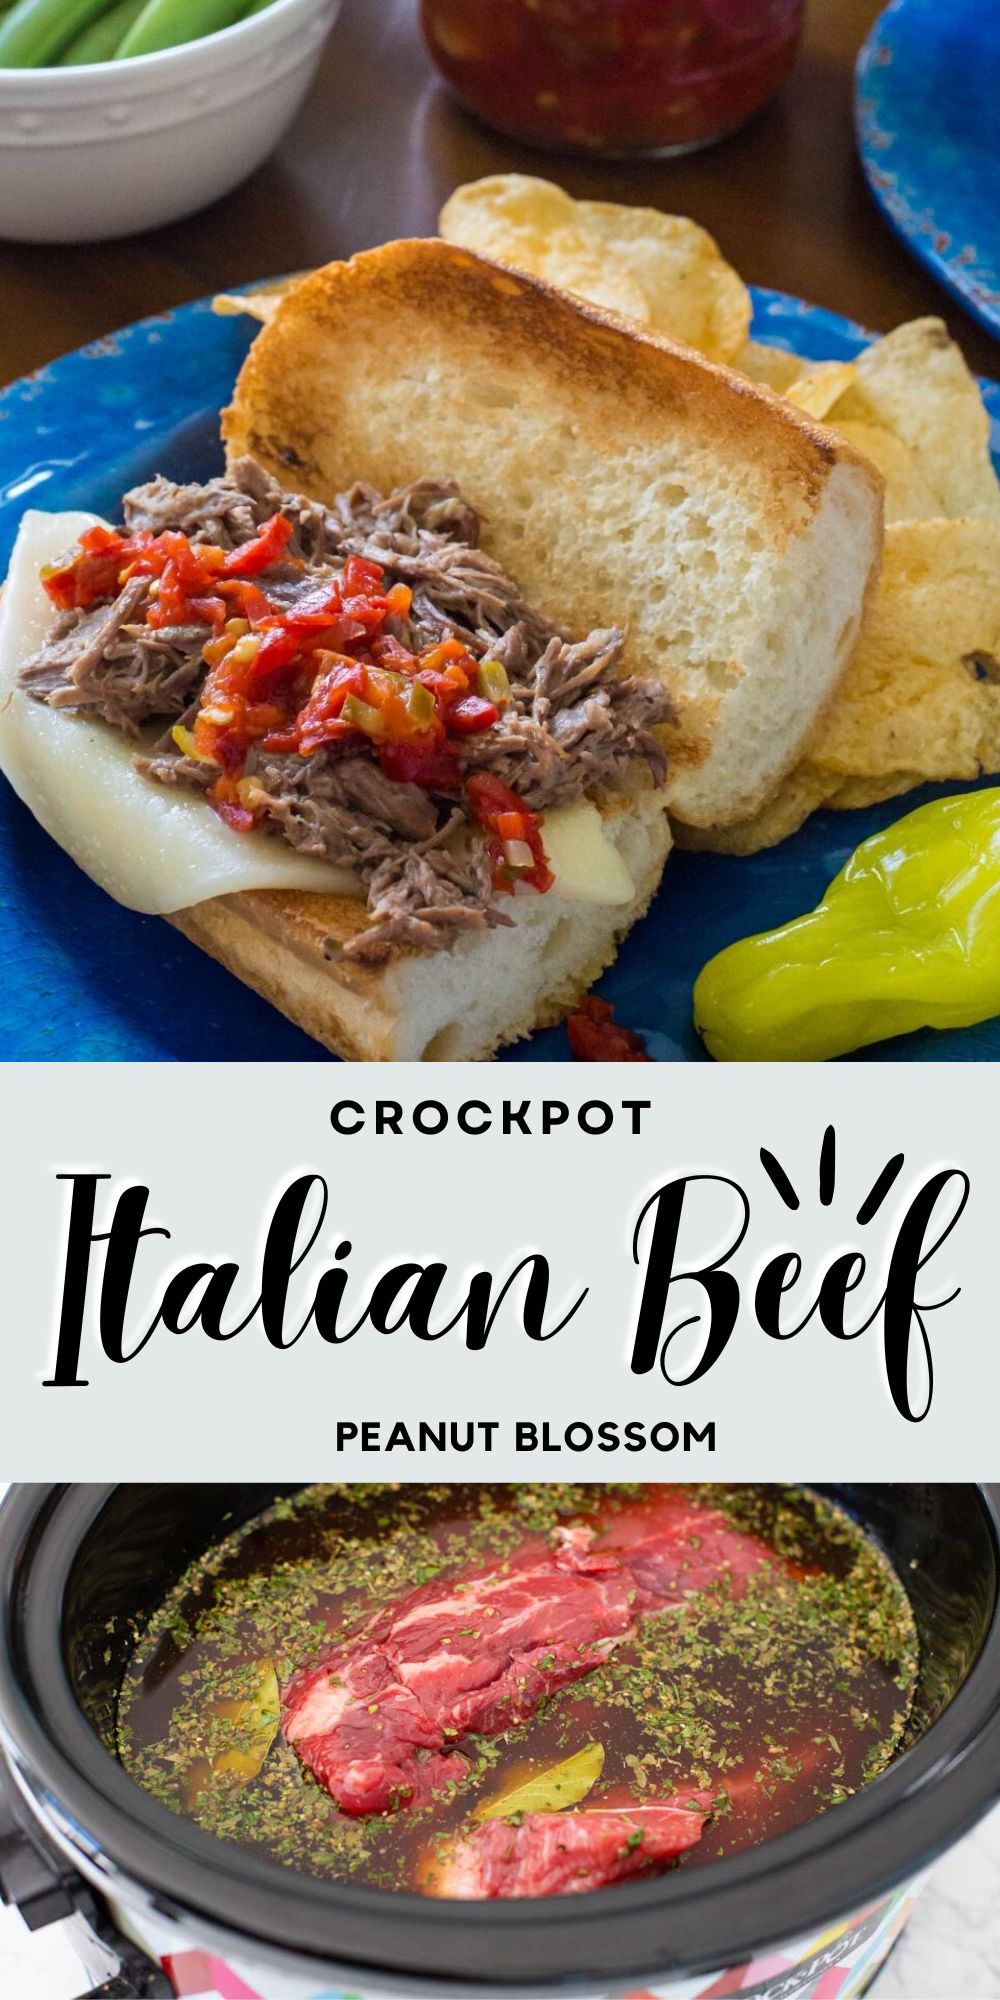 The photo collage shows an Italian Beef sandwich next to a photo of the beef cooking in a slowcooker.